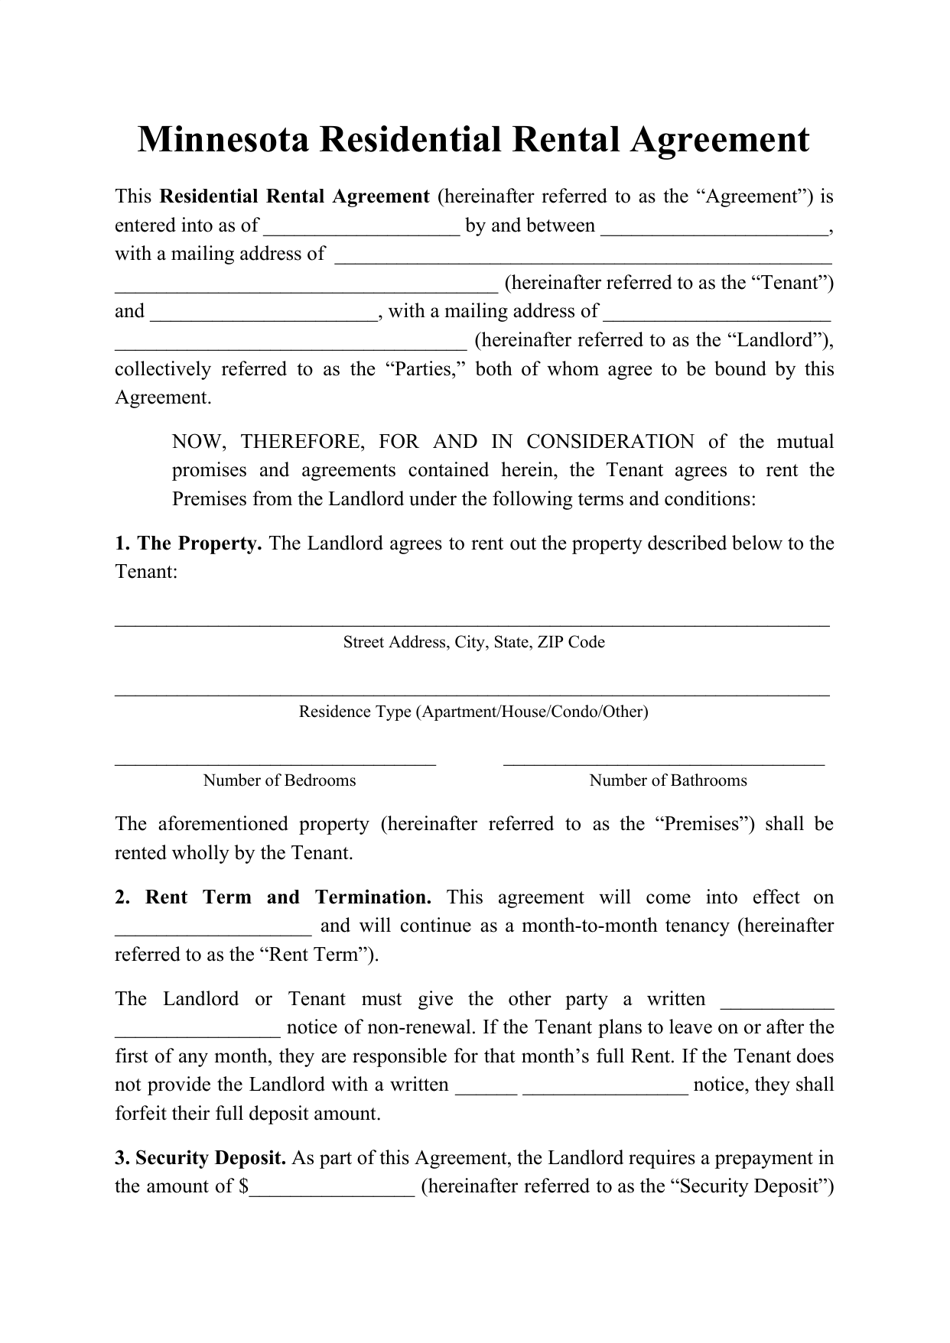 Residential Rental Agreement Template - Minnesota, Page 1